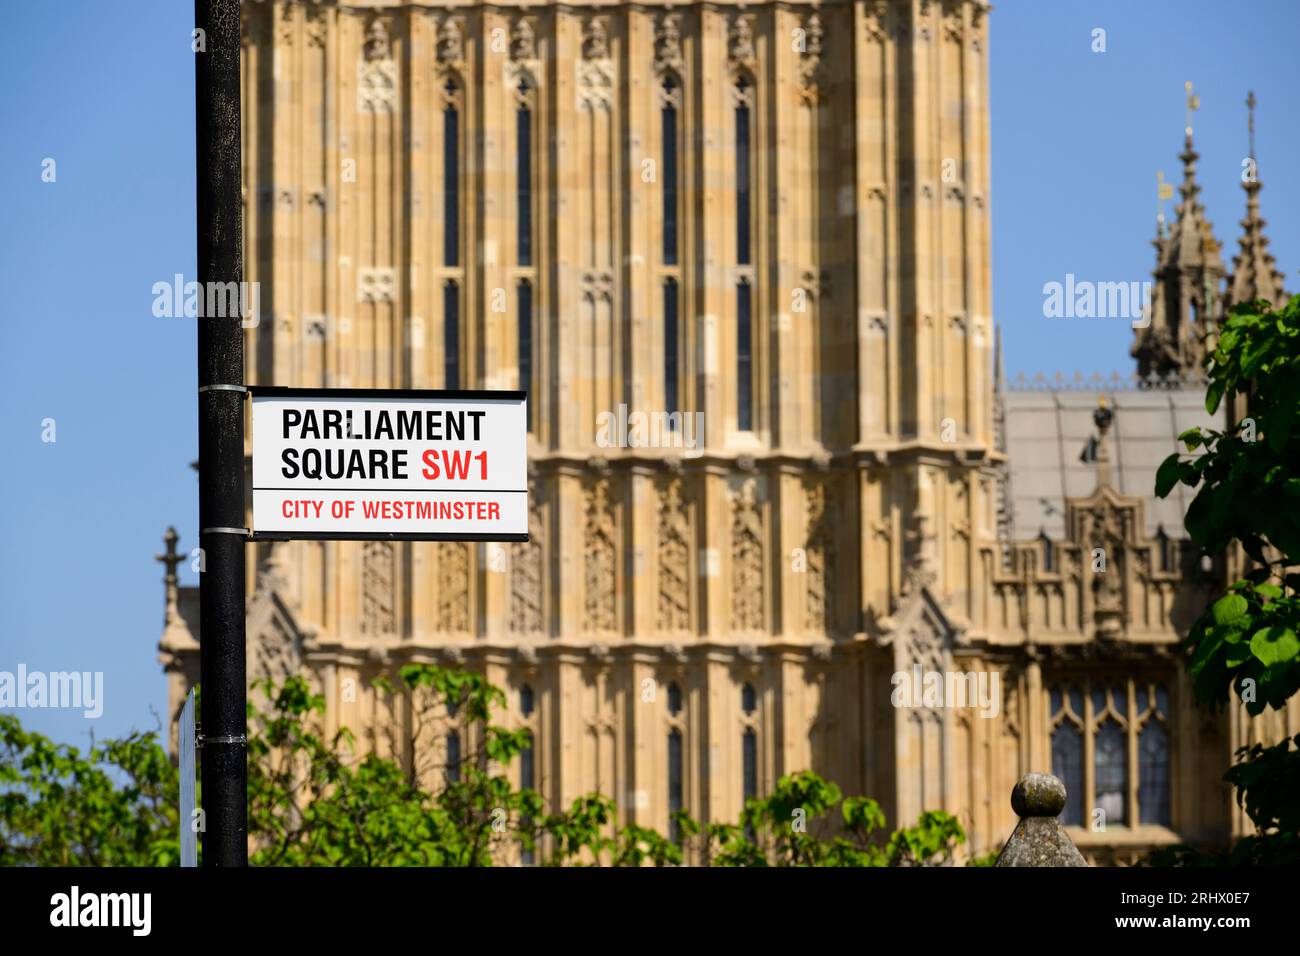 A Parliament Square road sign with the Palace of Westminster in the background. The Palace of Westminster is where the House of Commons and the House Stock Photo